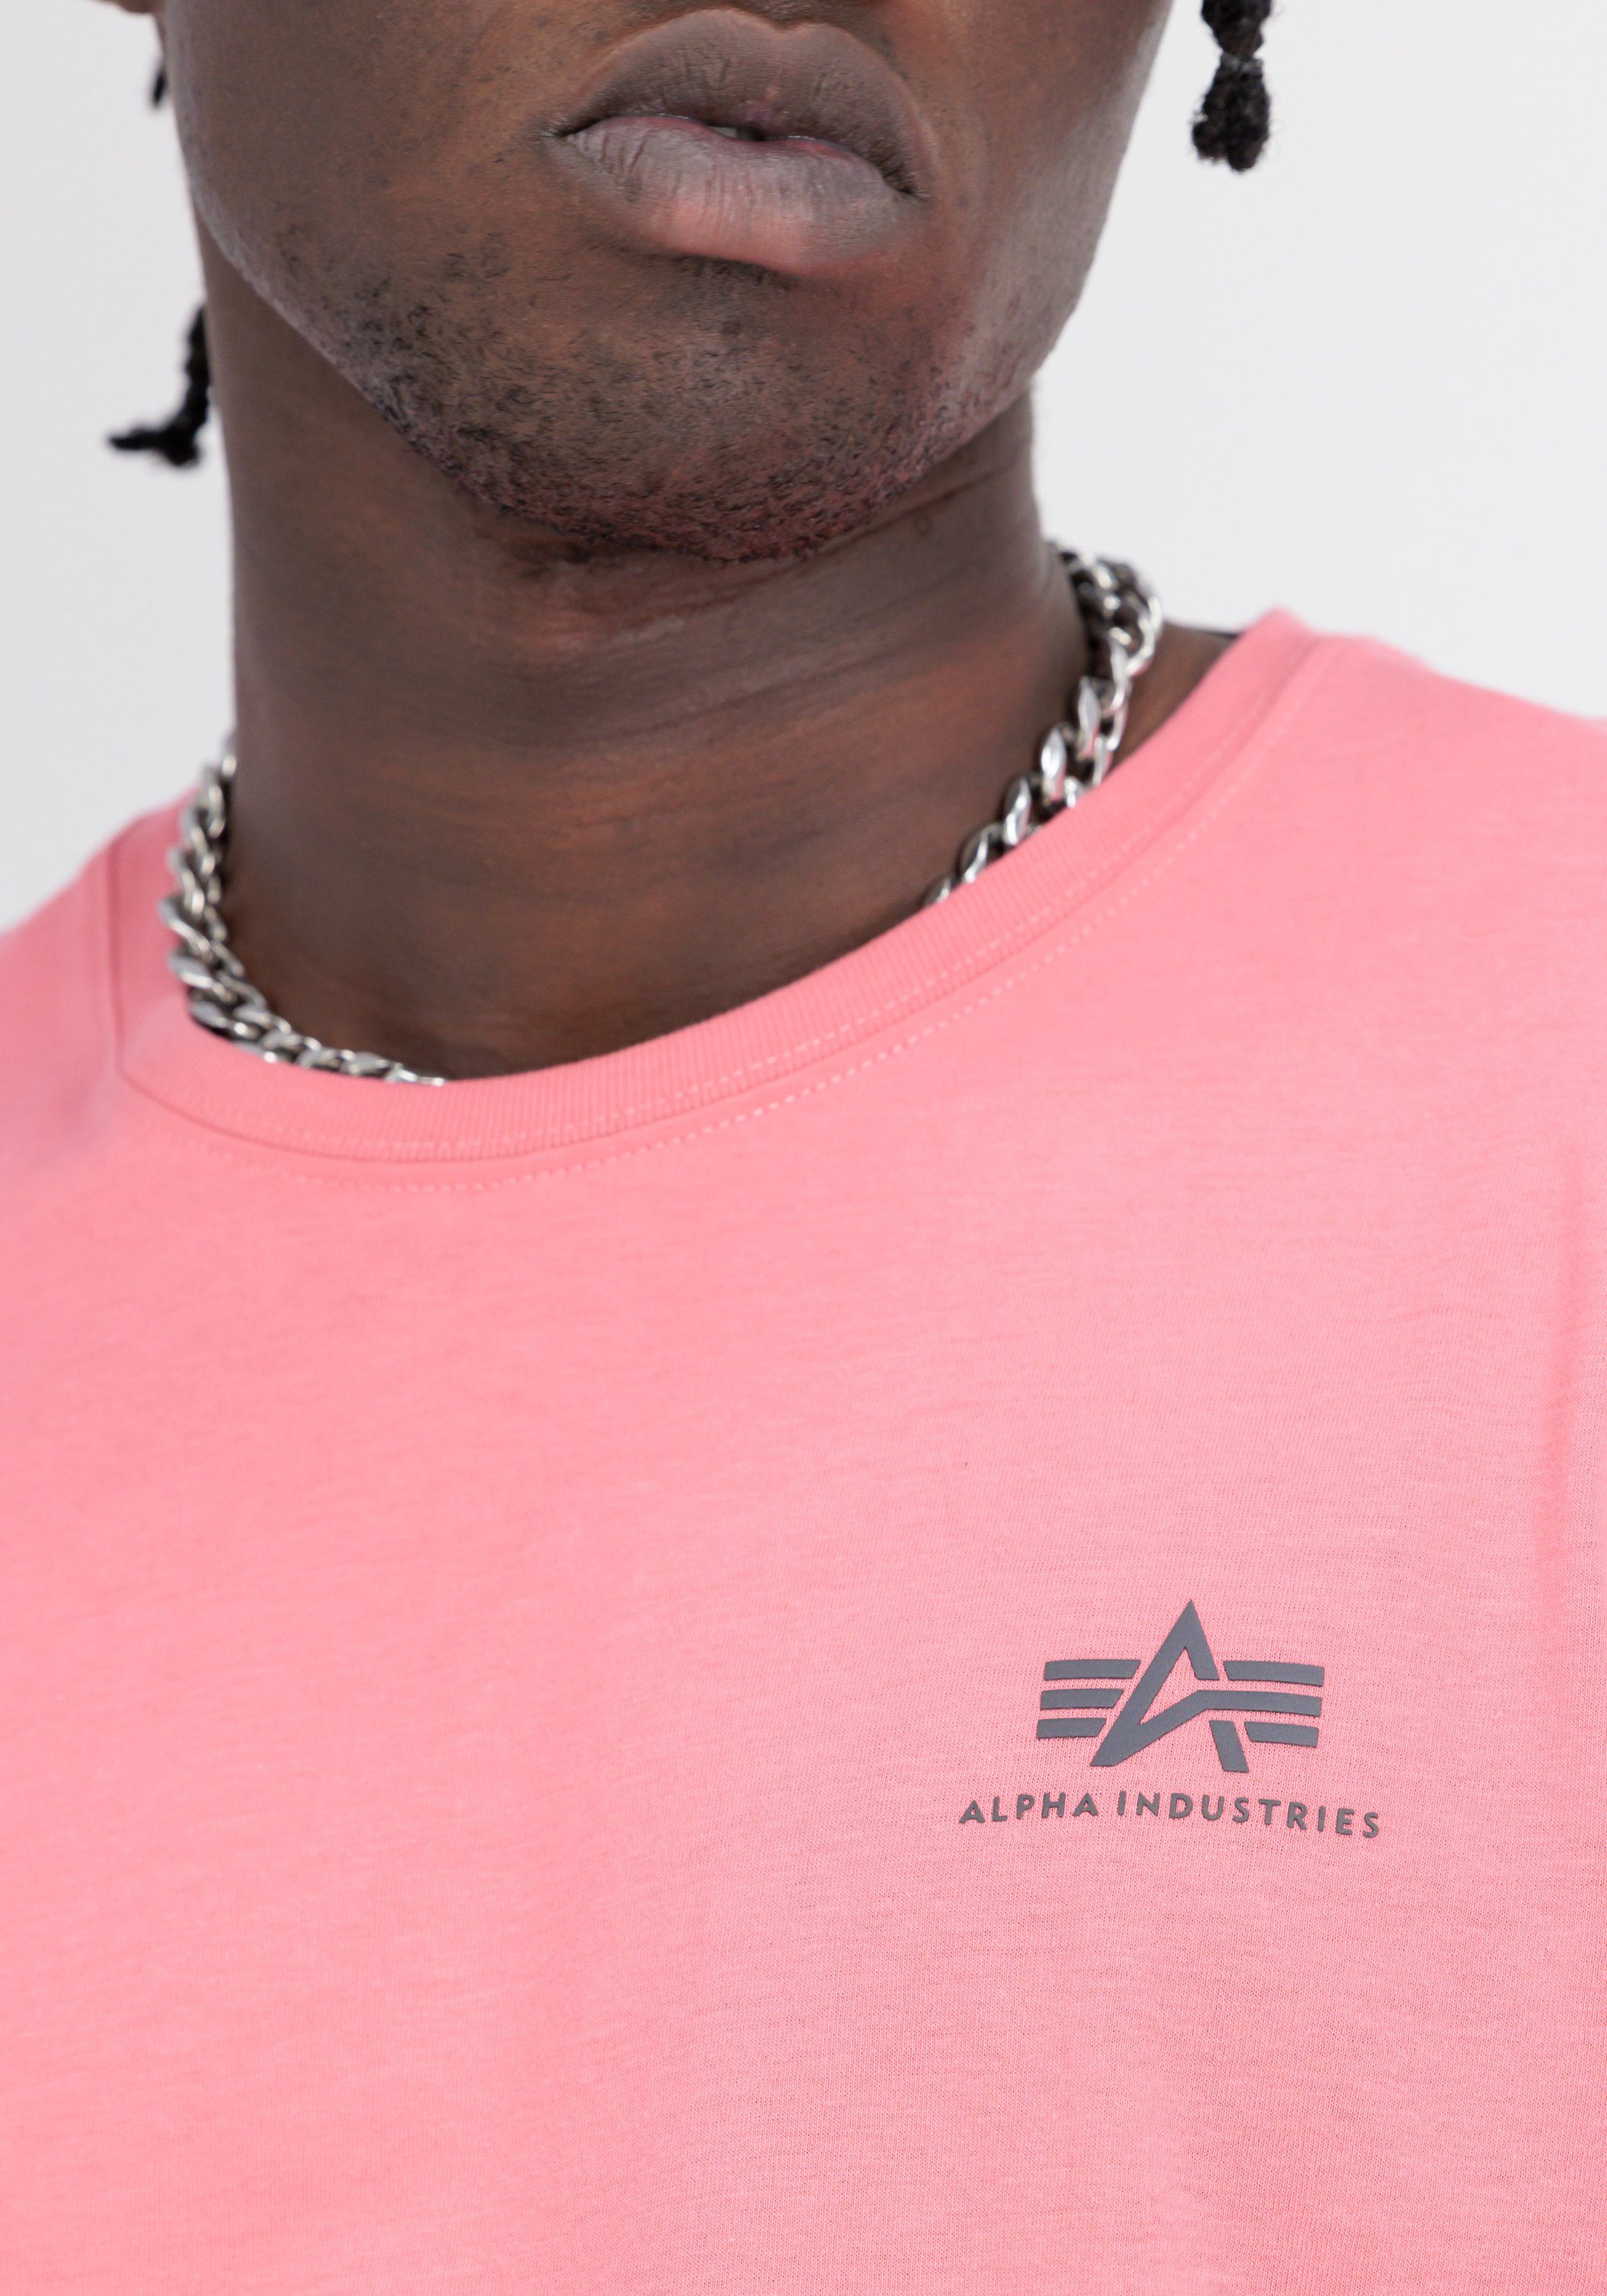 T-Shirt Industries Alpha Backprint red T coral T-Shirts Men - Industries Alpha